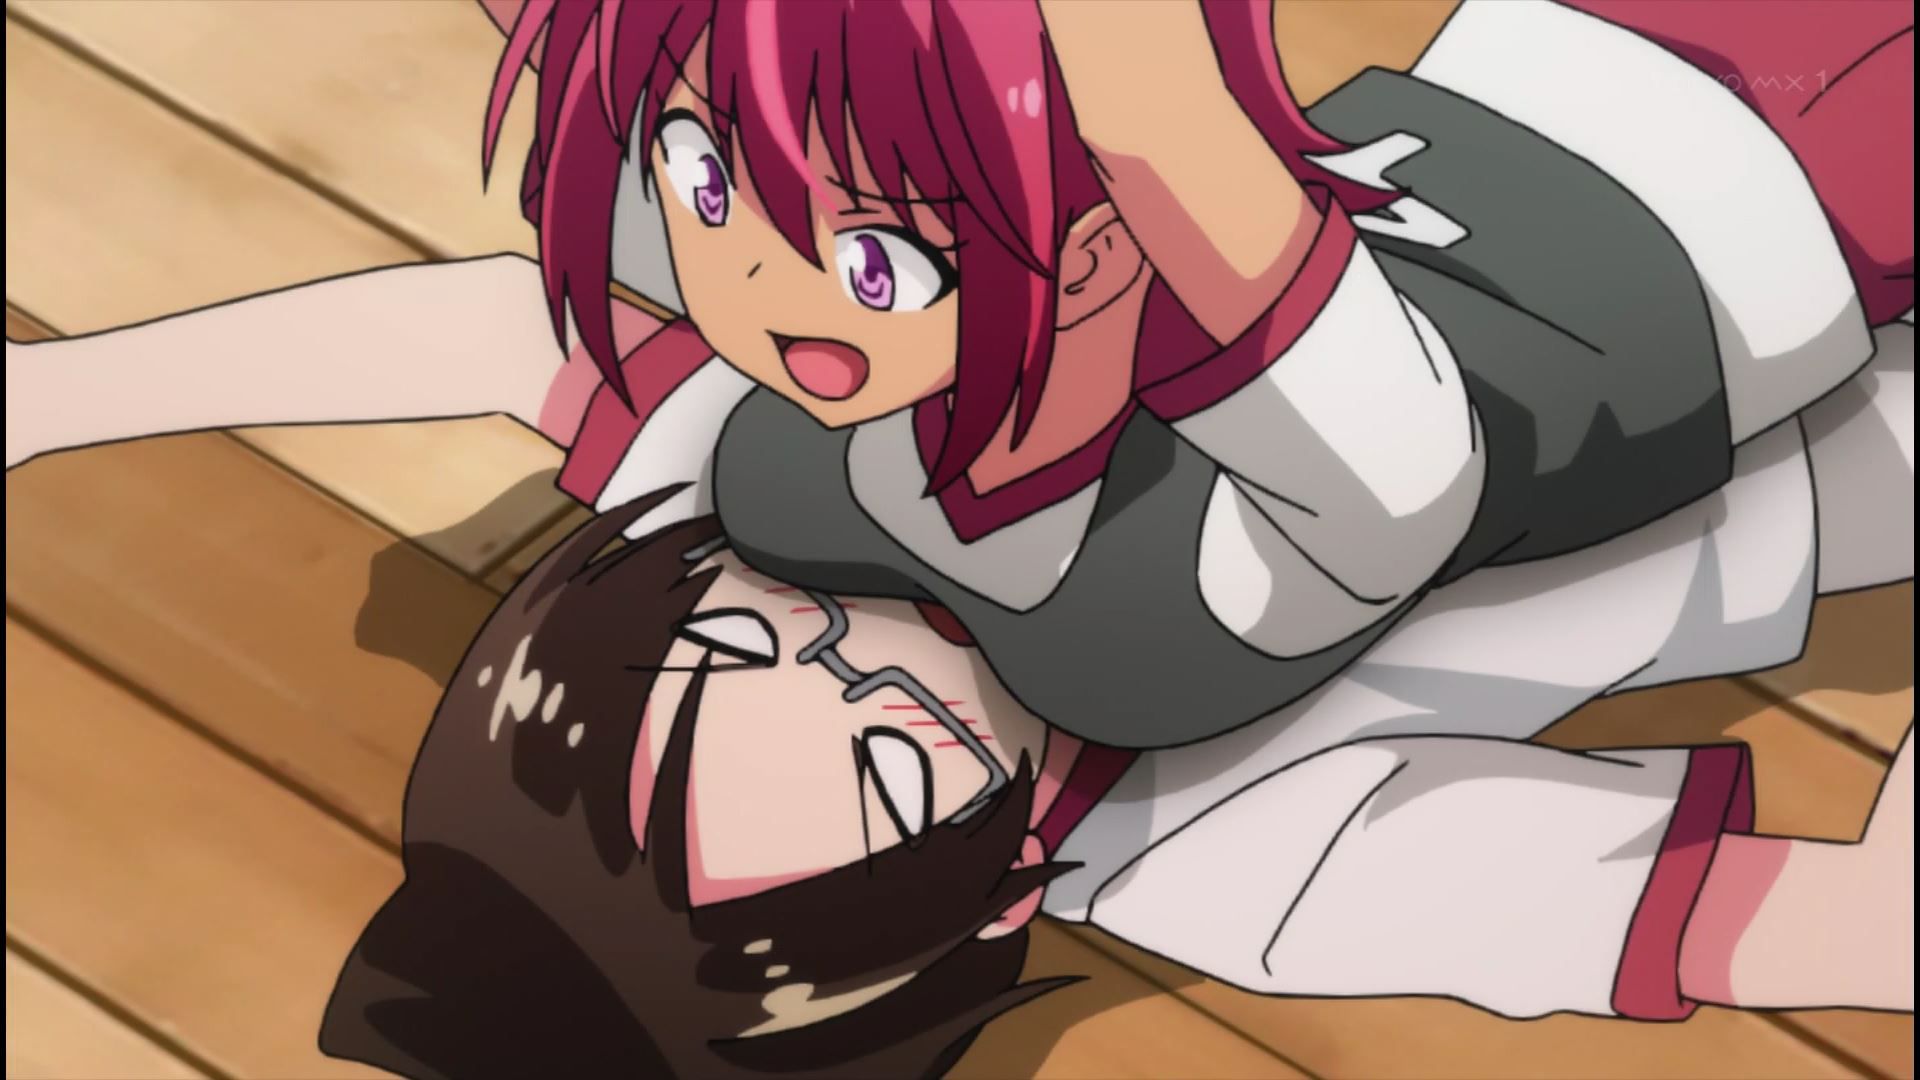 Anime [We can not study] 4 in the story erotic scene such as touching the belly and erotic 18